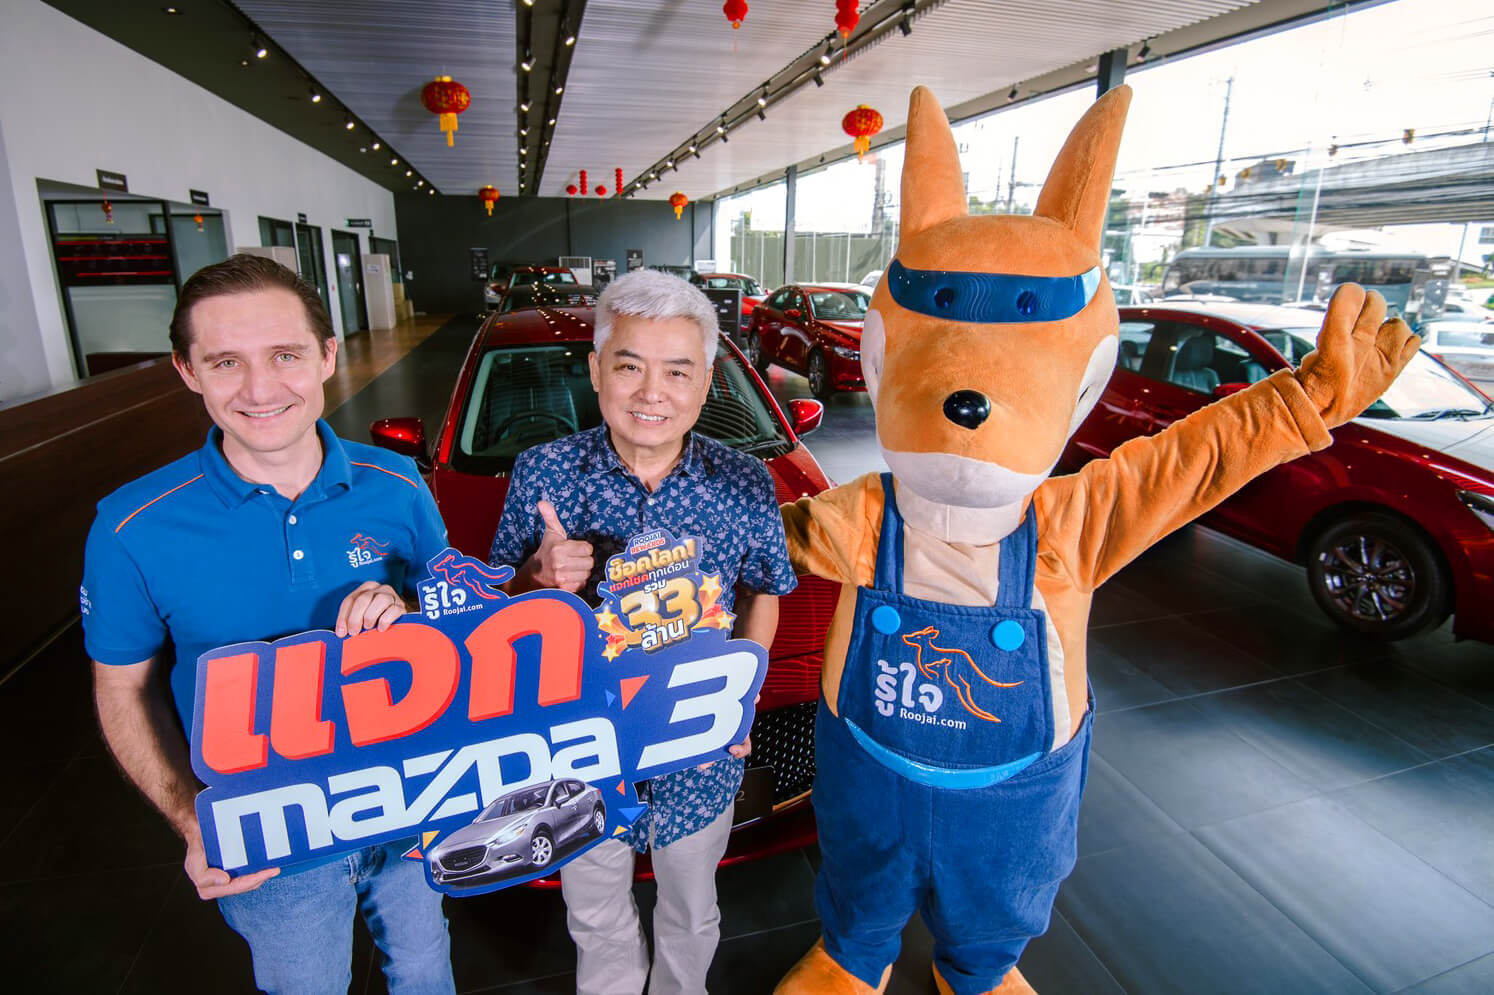 Roojai.com awards grand prize mazda 3 to the lucky draw customer who bought car insurance with Roojai